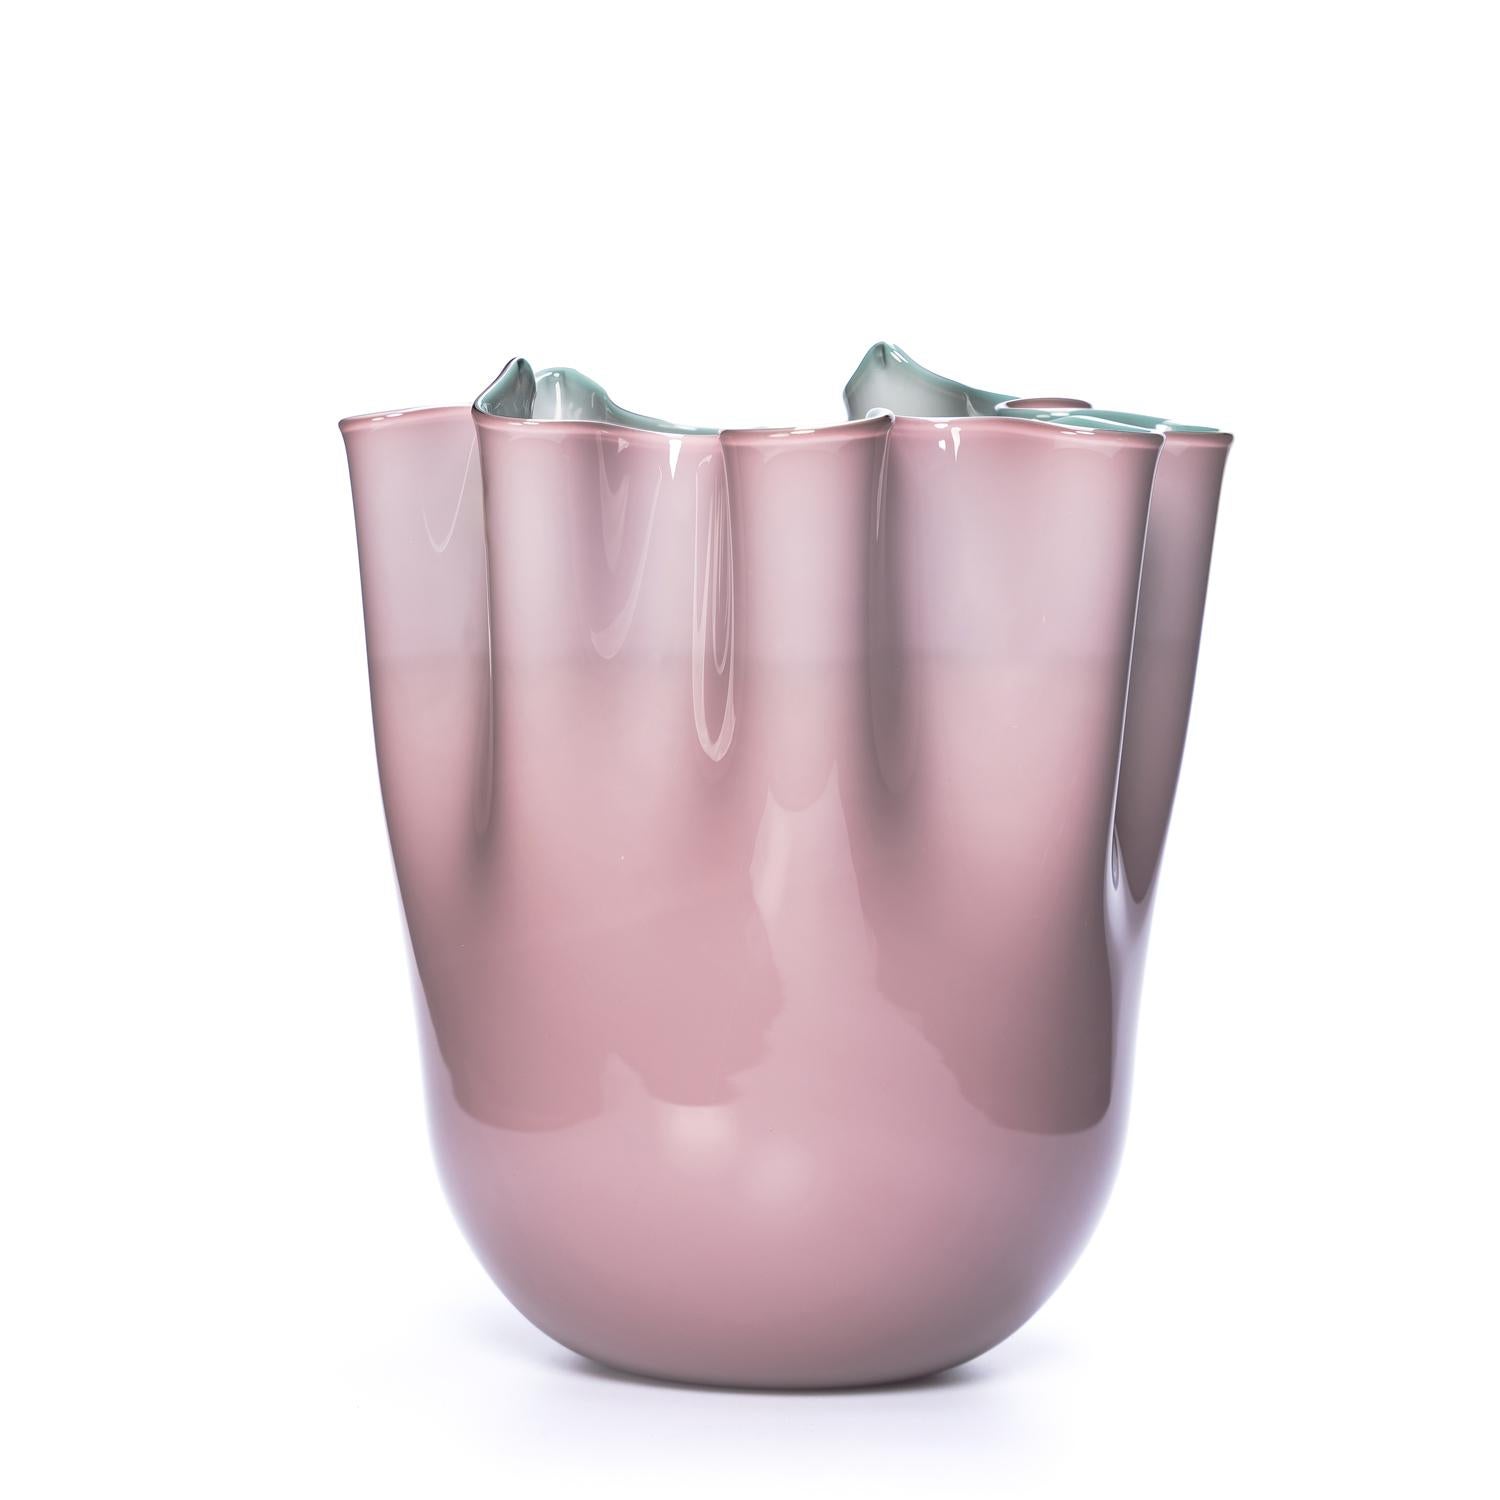 We are delighted to introduce our latest creation - this exquisite Murano glass art vase. 
Our aim is to evoke emotions through our art, and we are proud to present this stunning vase that is sure to captivate your senses.

This art vase is crafted